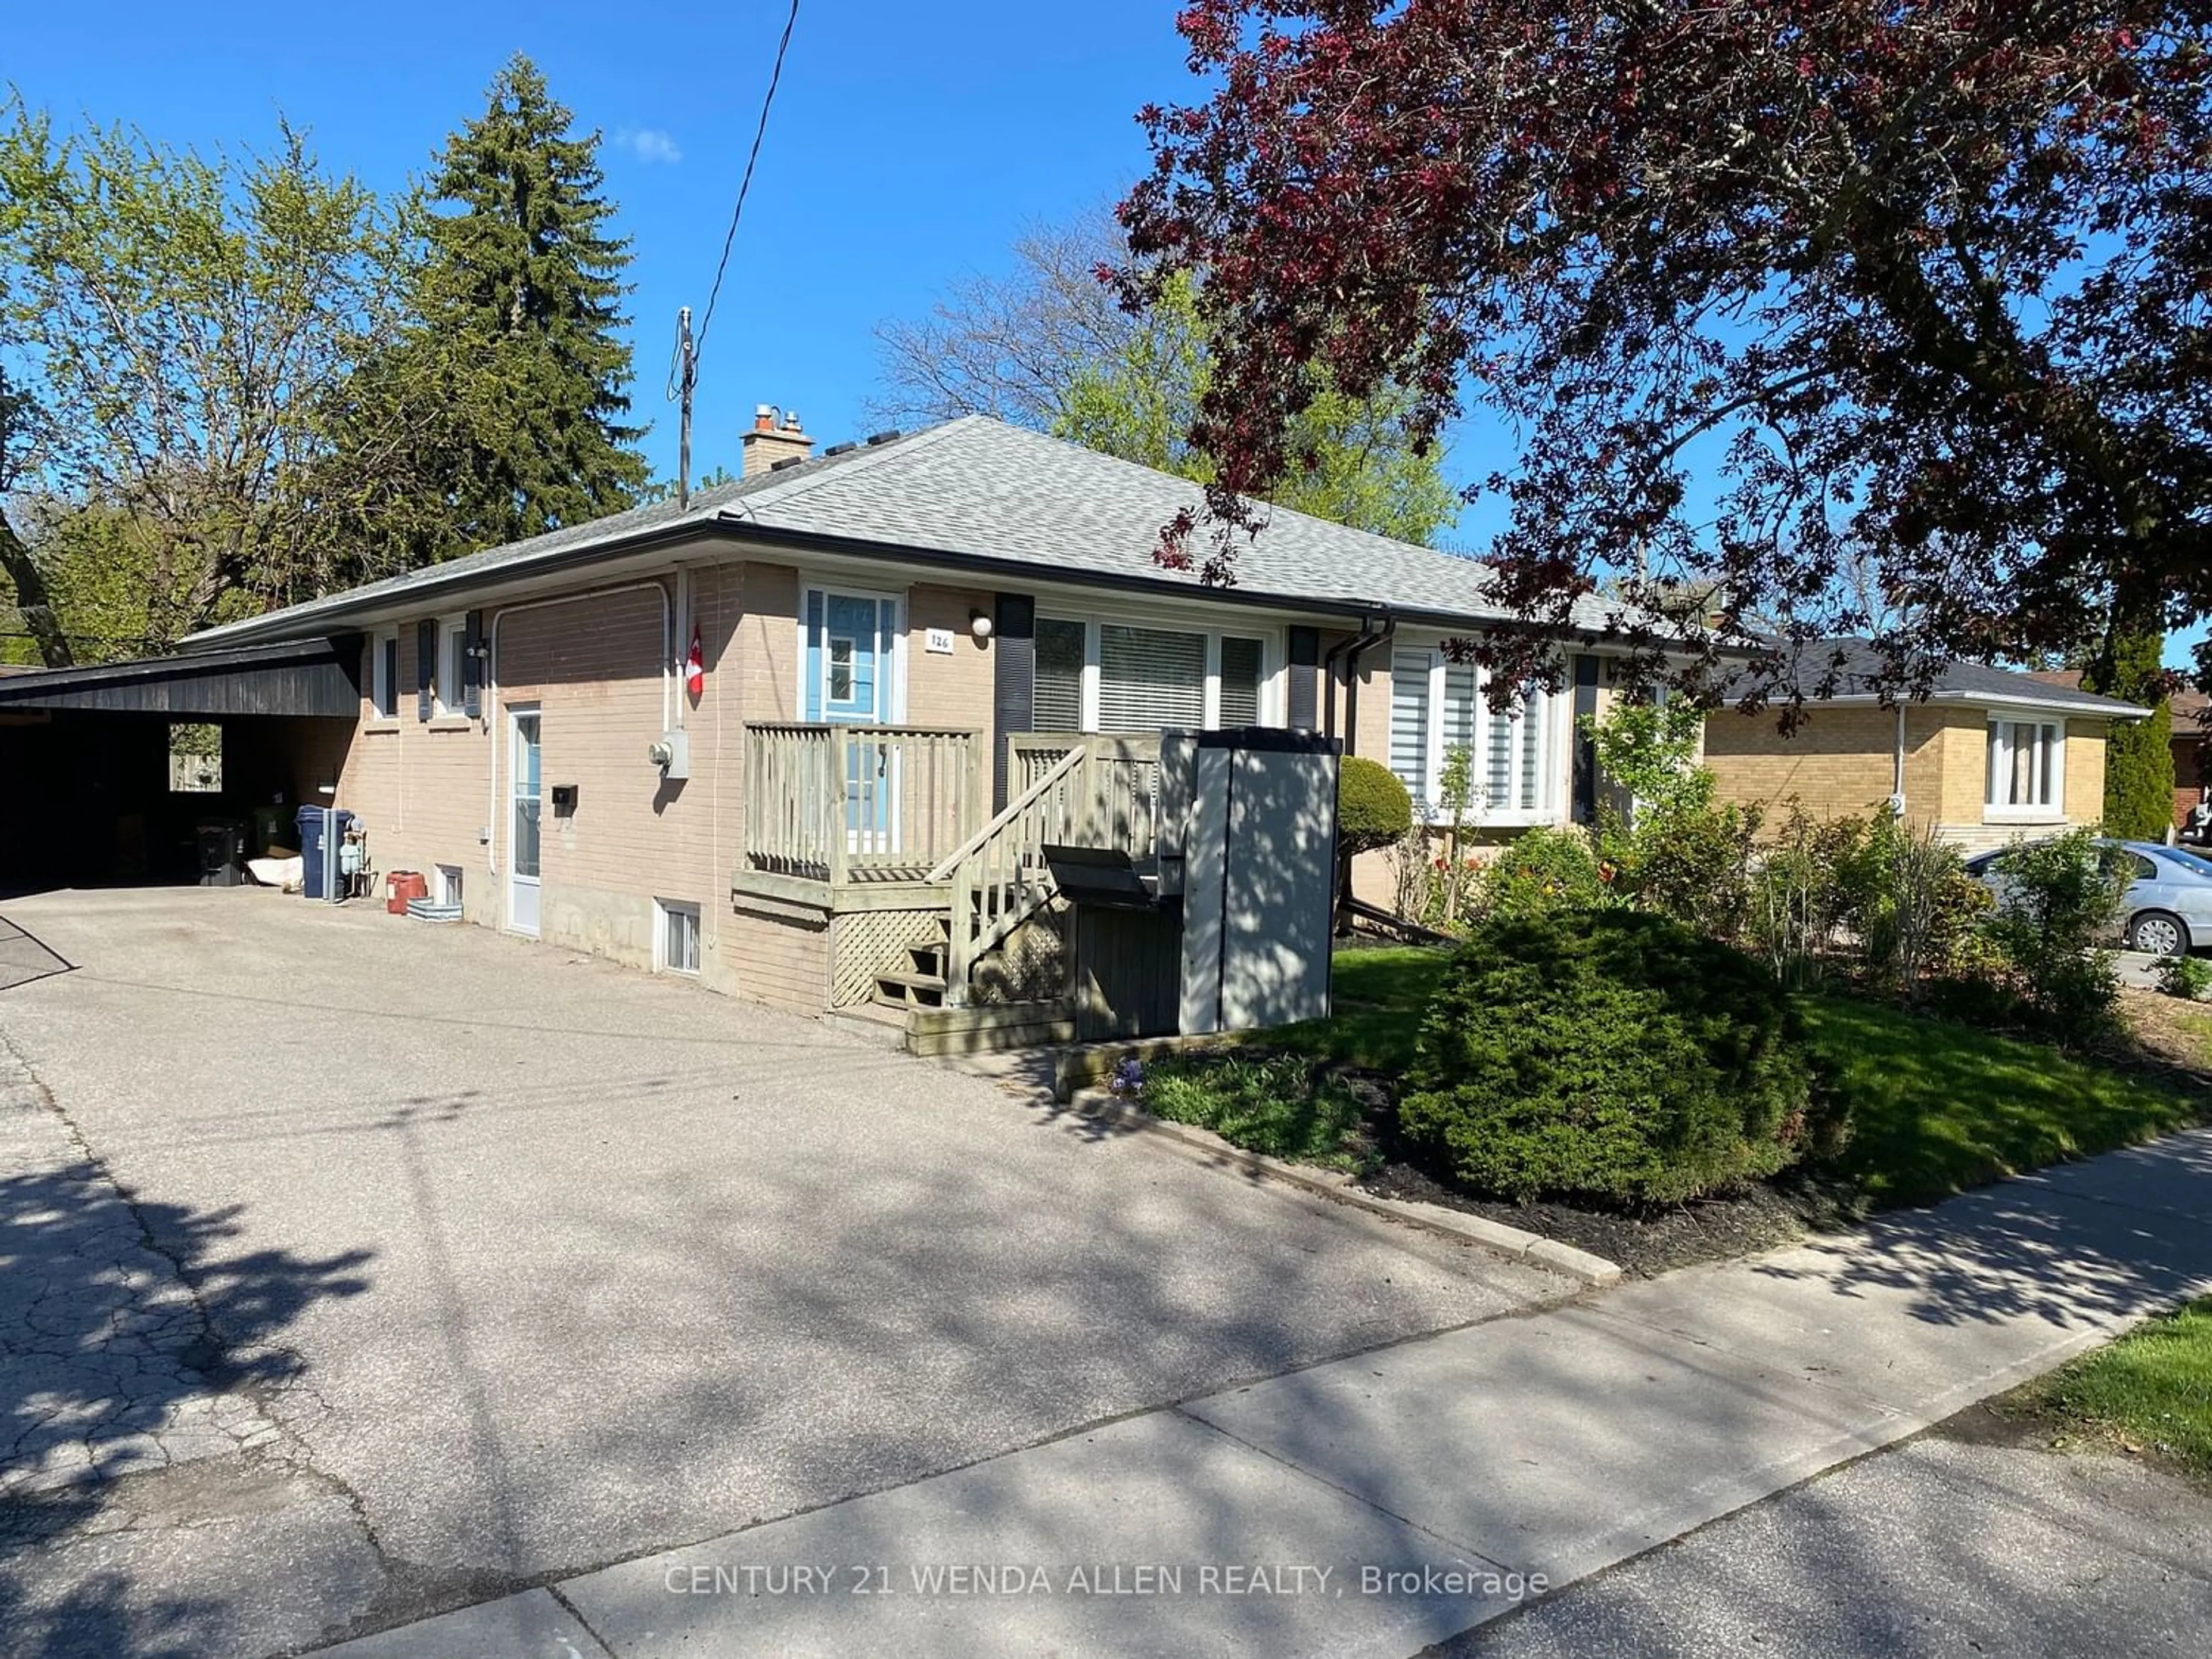 Frontside or backside of a home for 126 Birkdale Rd, Toronto Ontario M1P 3R5